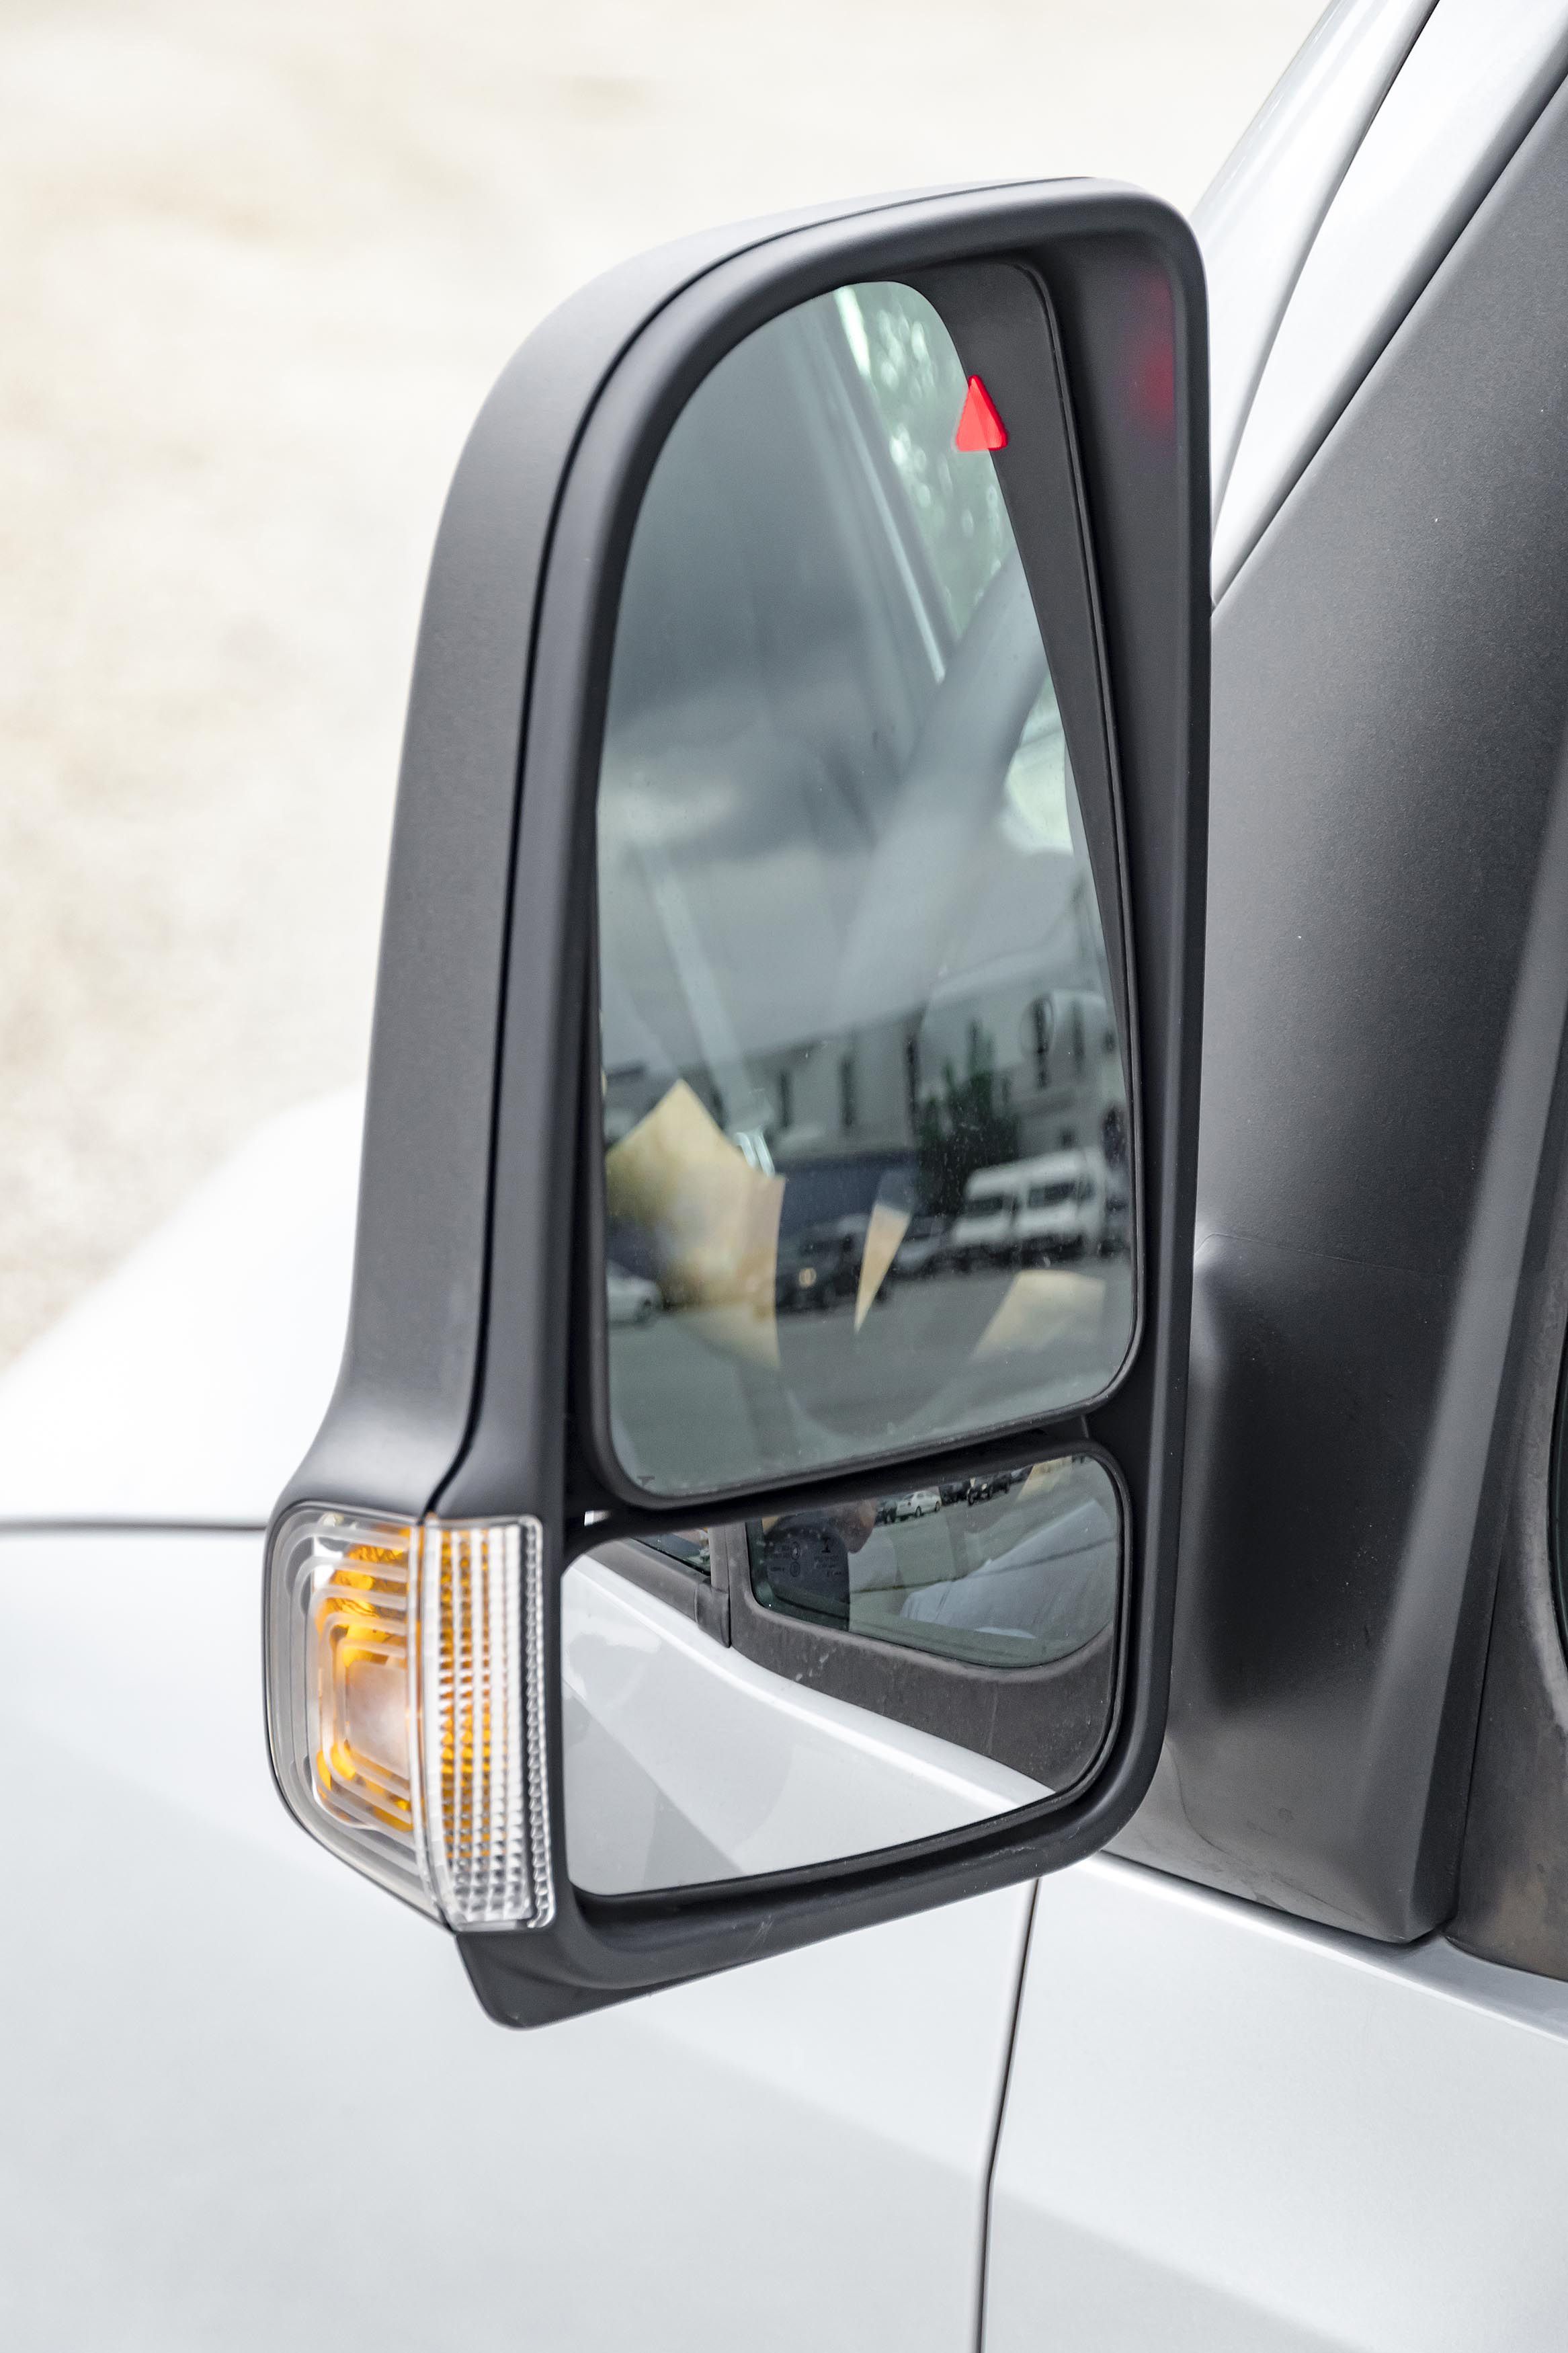 How Much Does It Cost To Replace A Car Side Mirror?